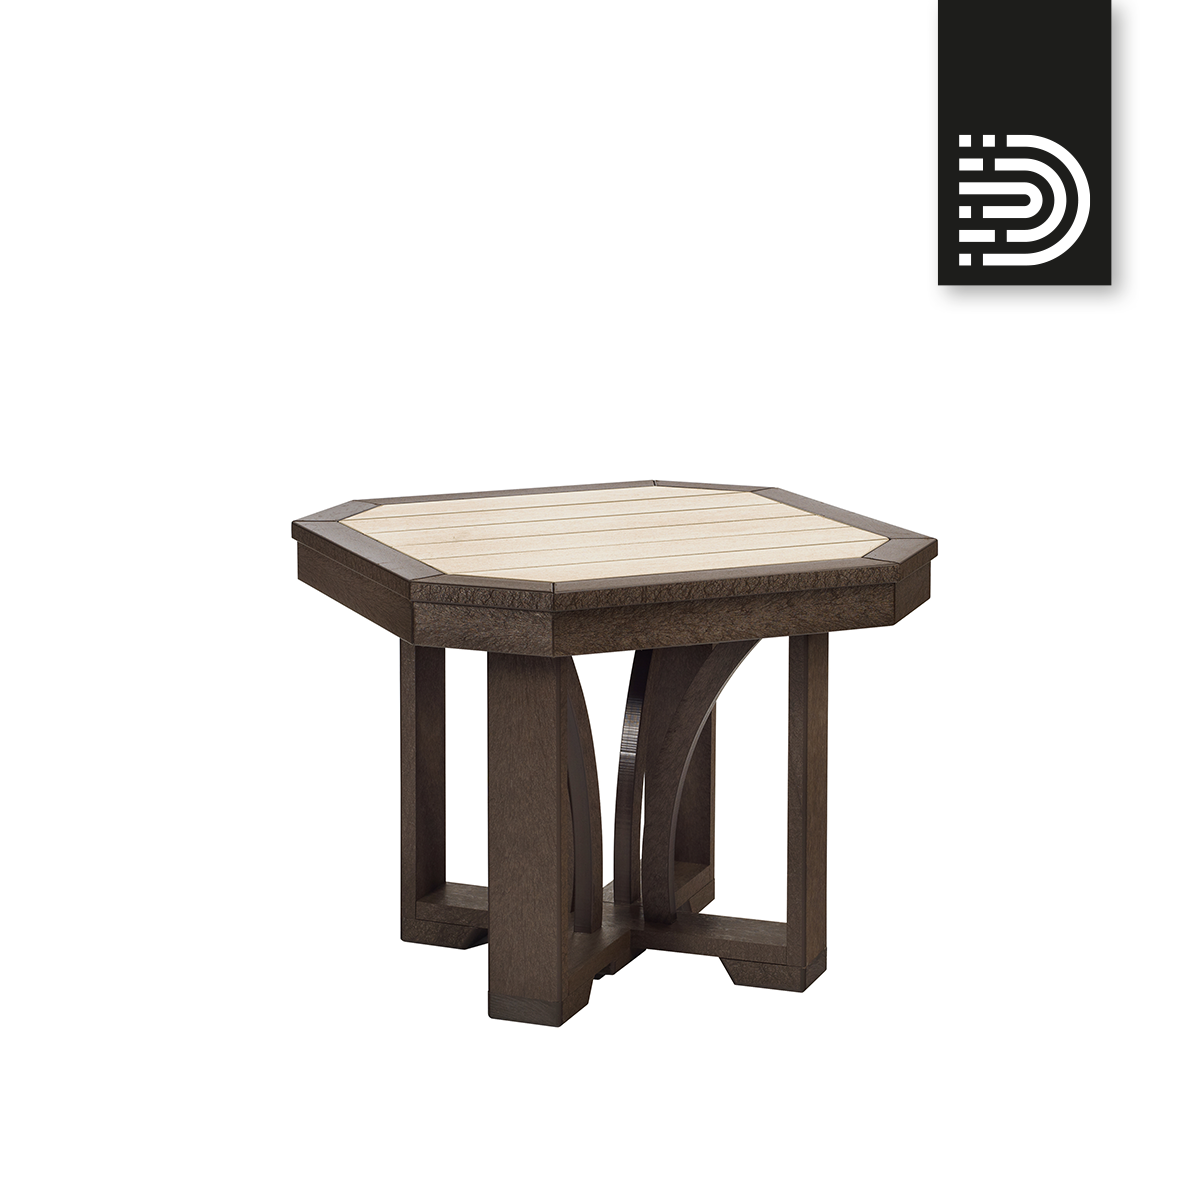 T31 Square End Table  -  16/07 choco-beige